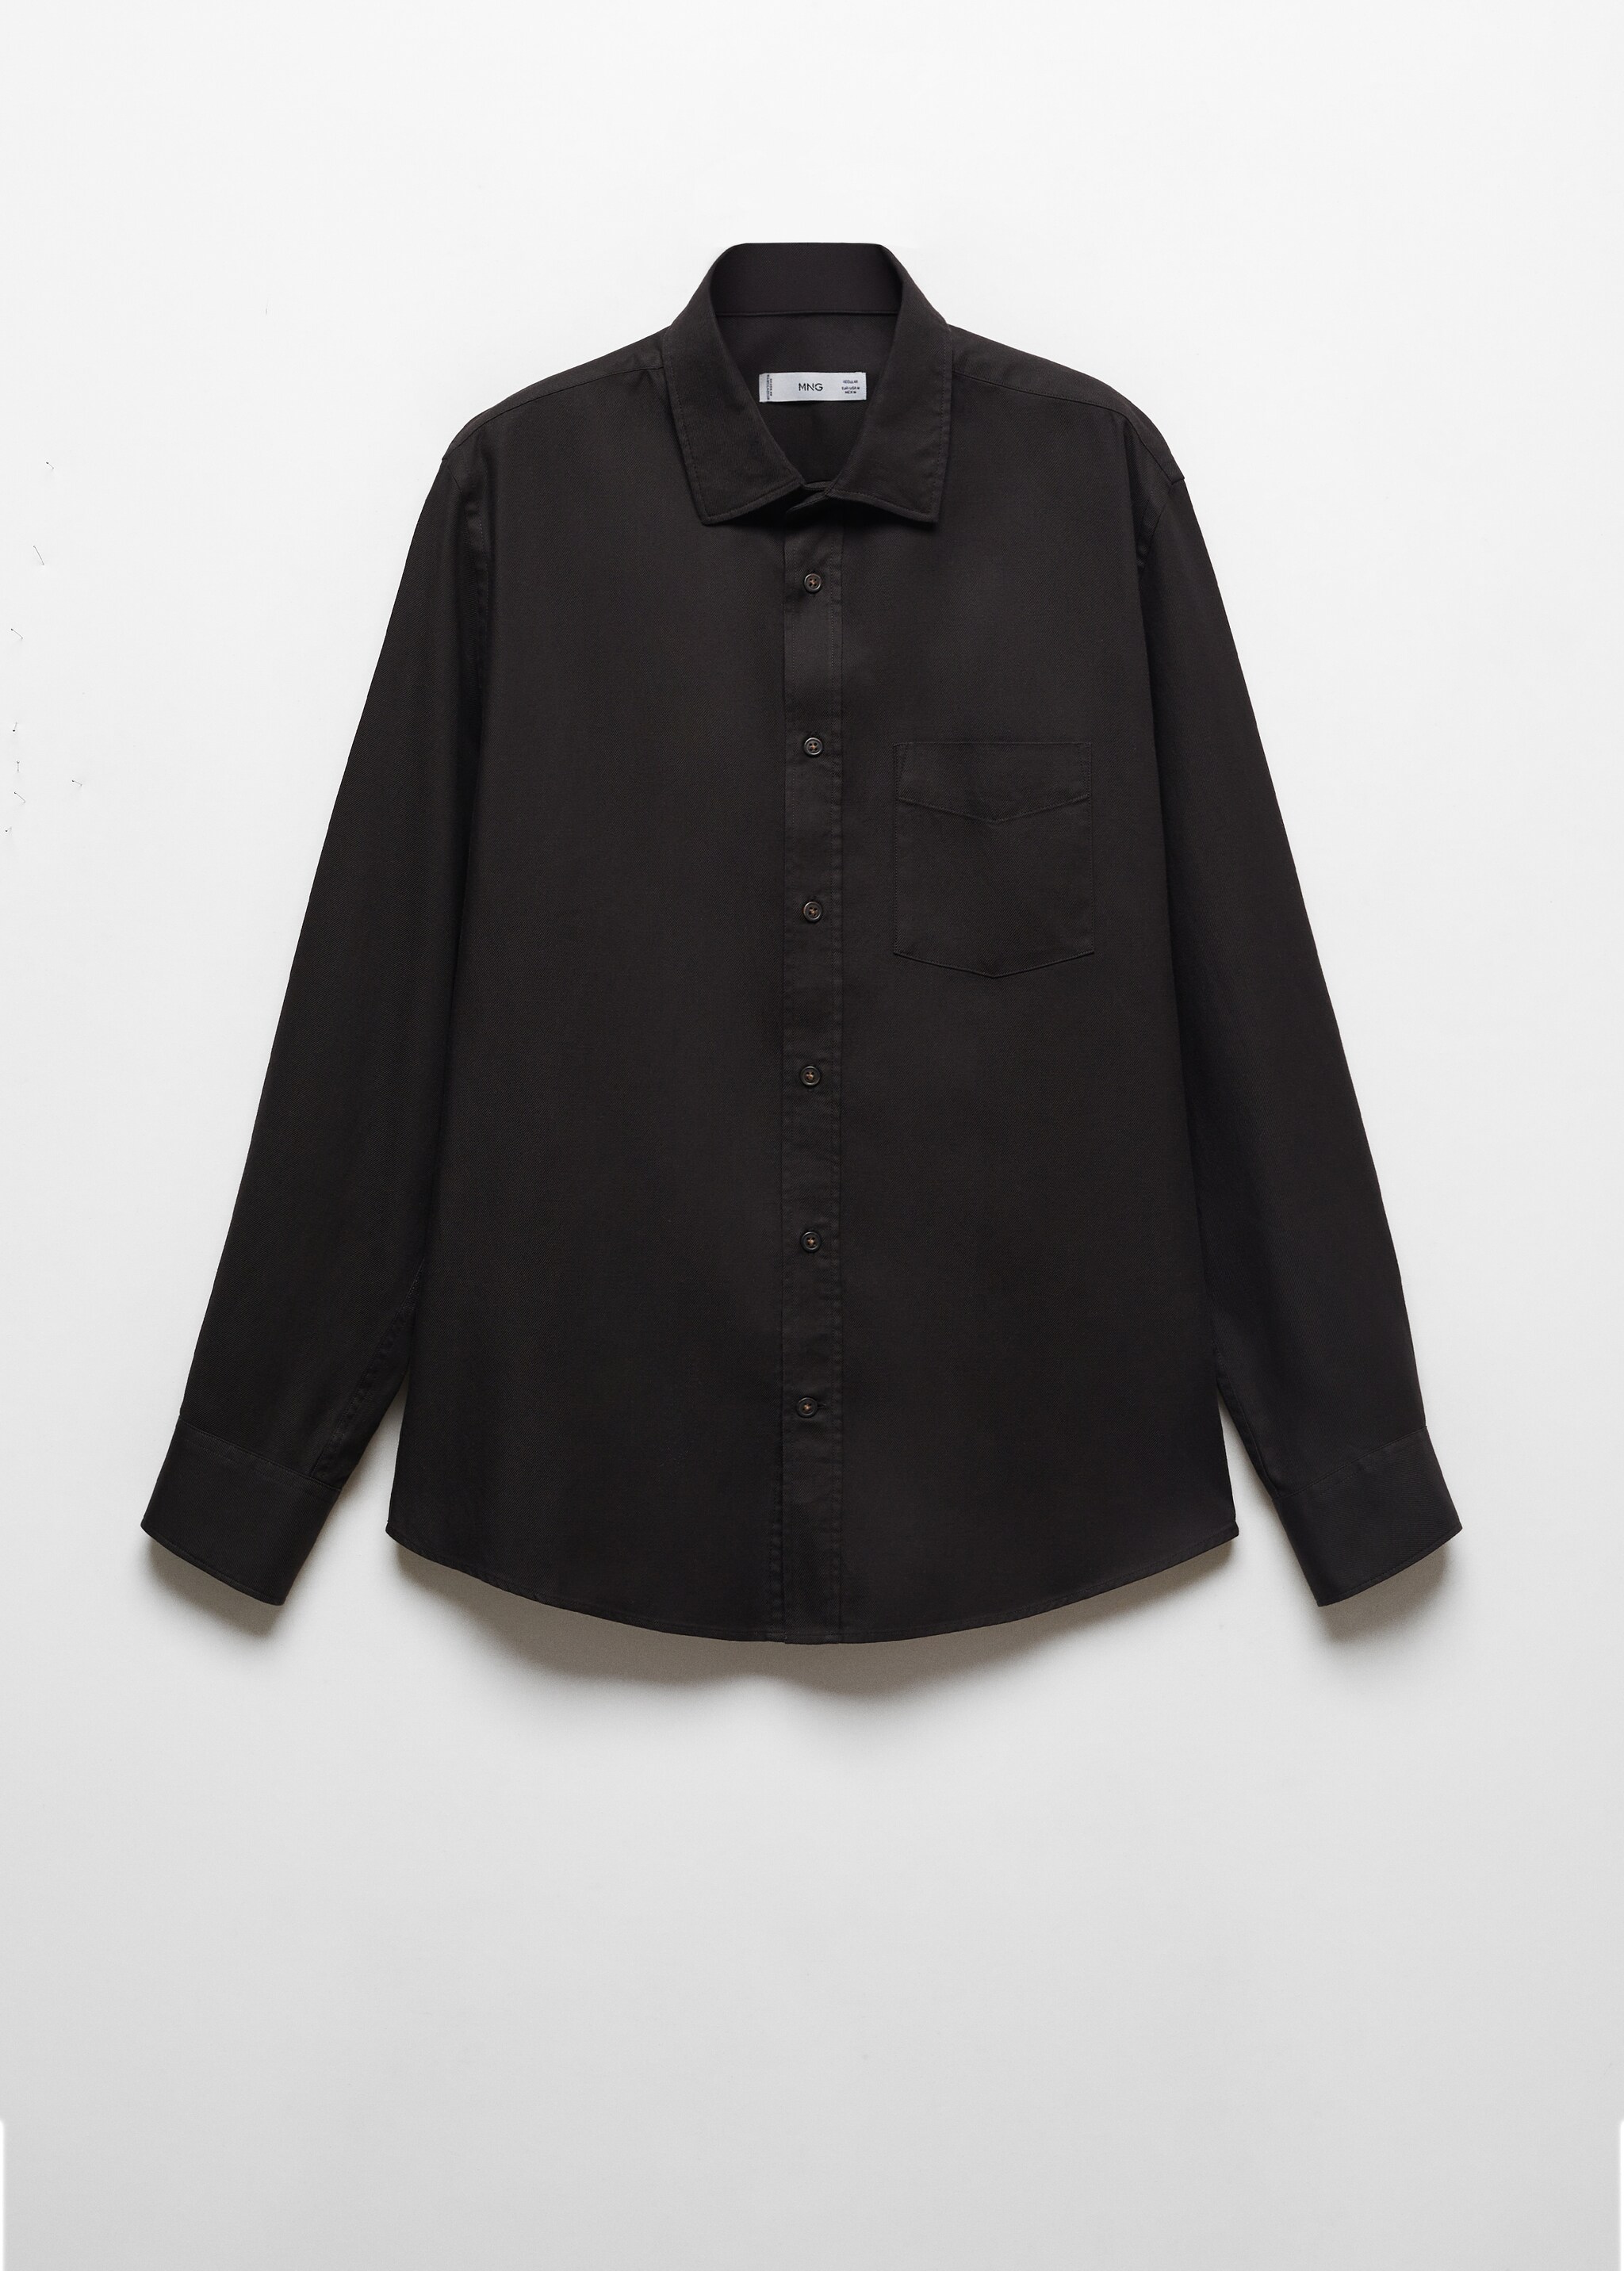 Brushed cotton twill shirt - Article without model